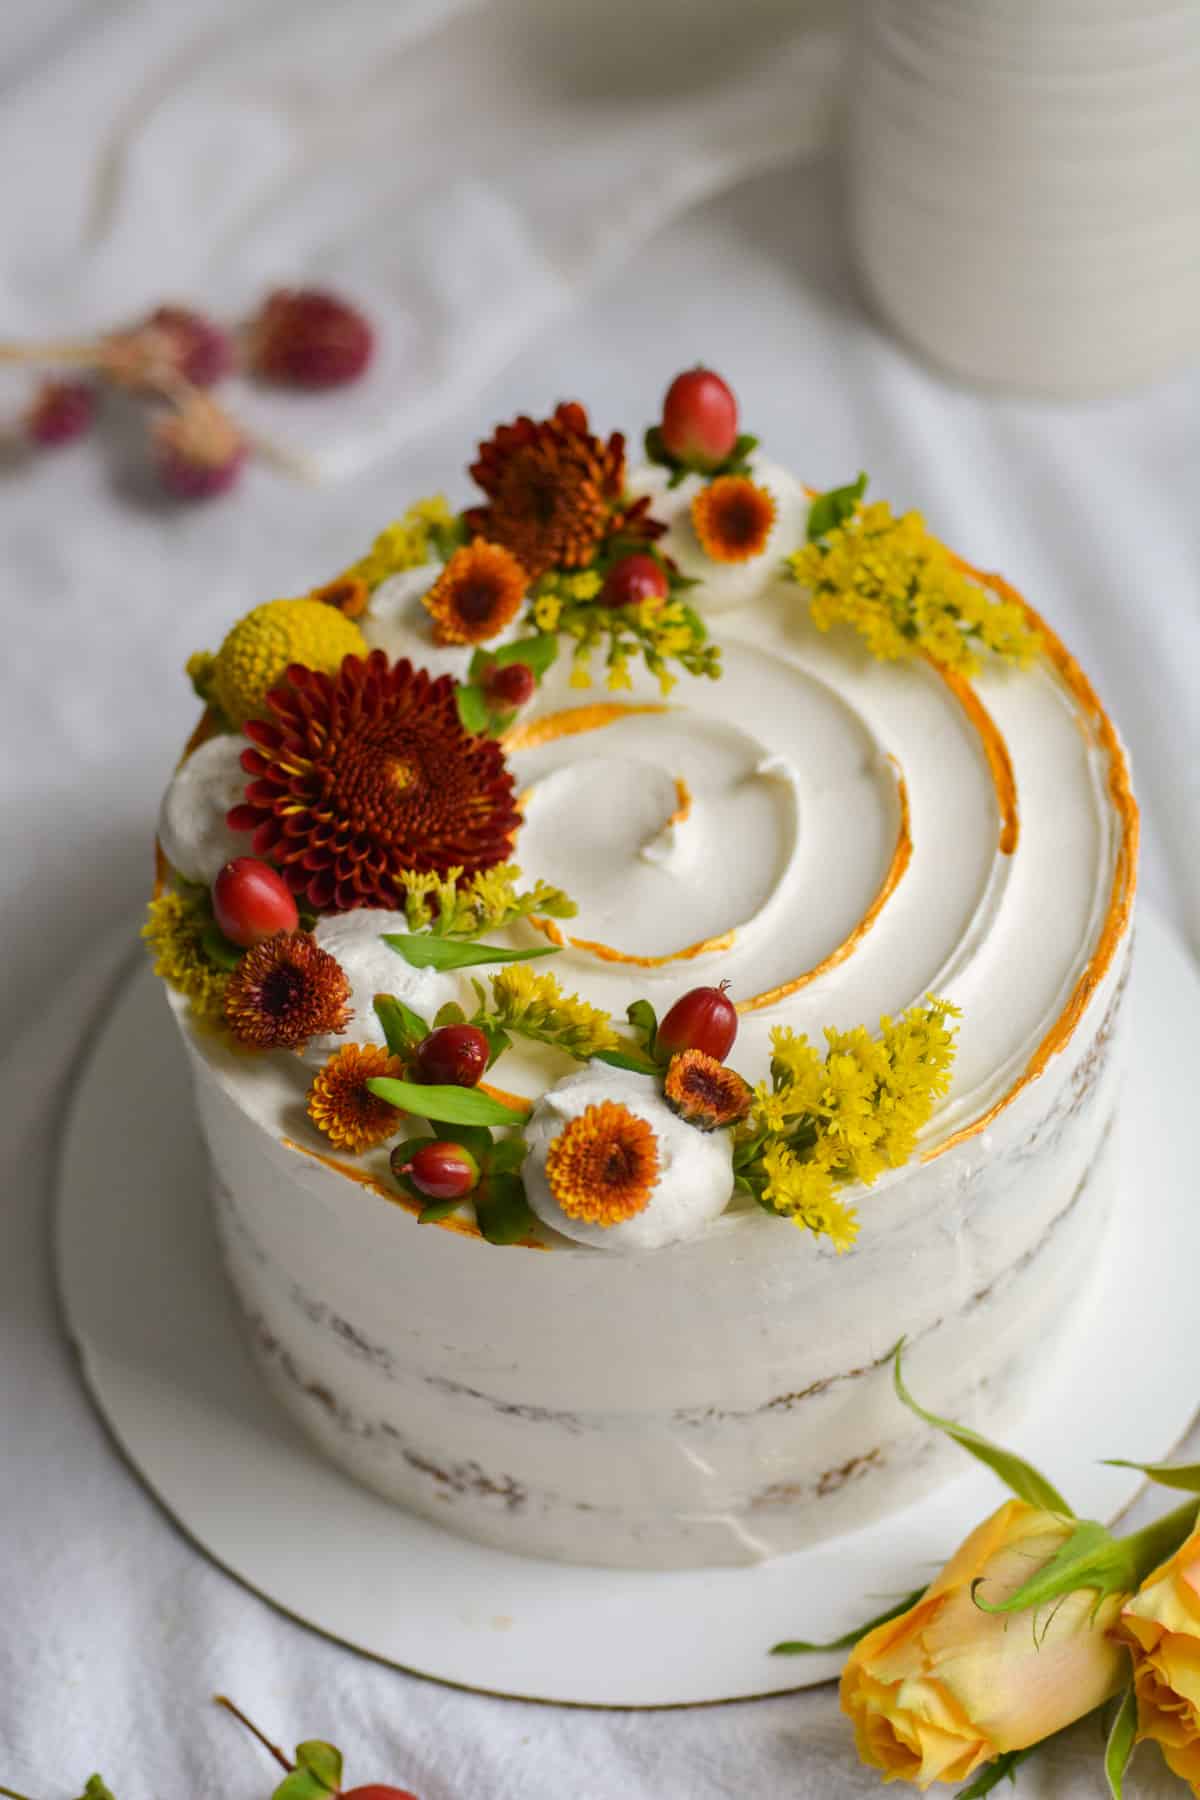 A cake frosted with vegan maple bourbon buttercream frosting decorated with maroon and yellow flowers